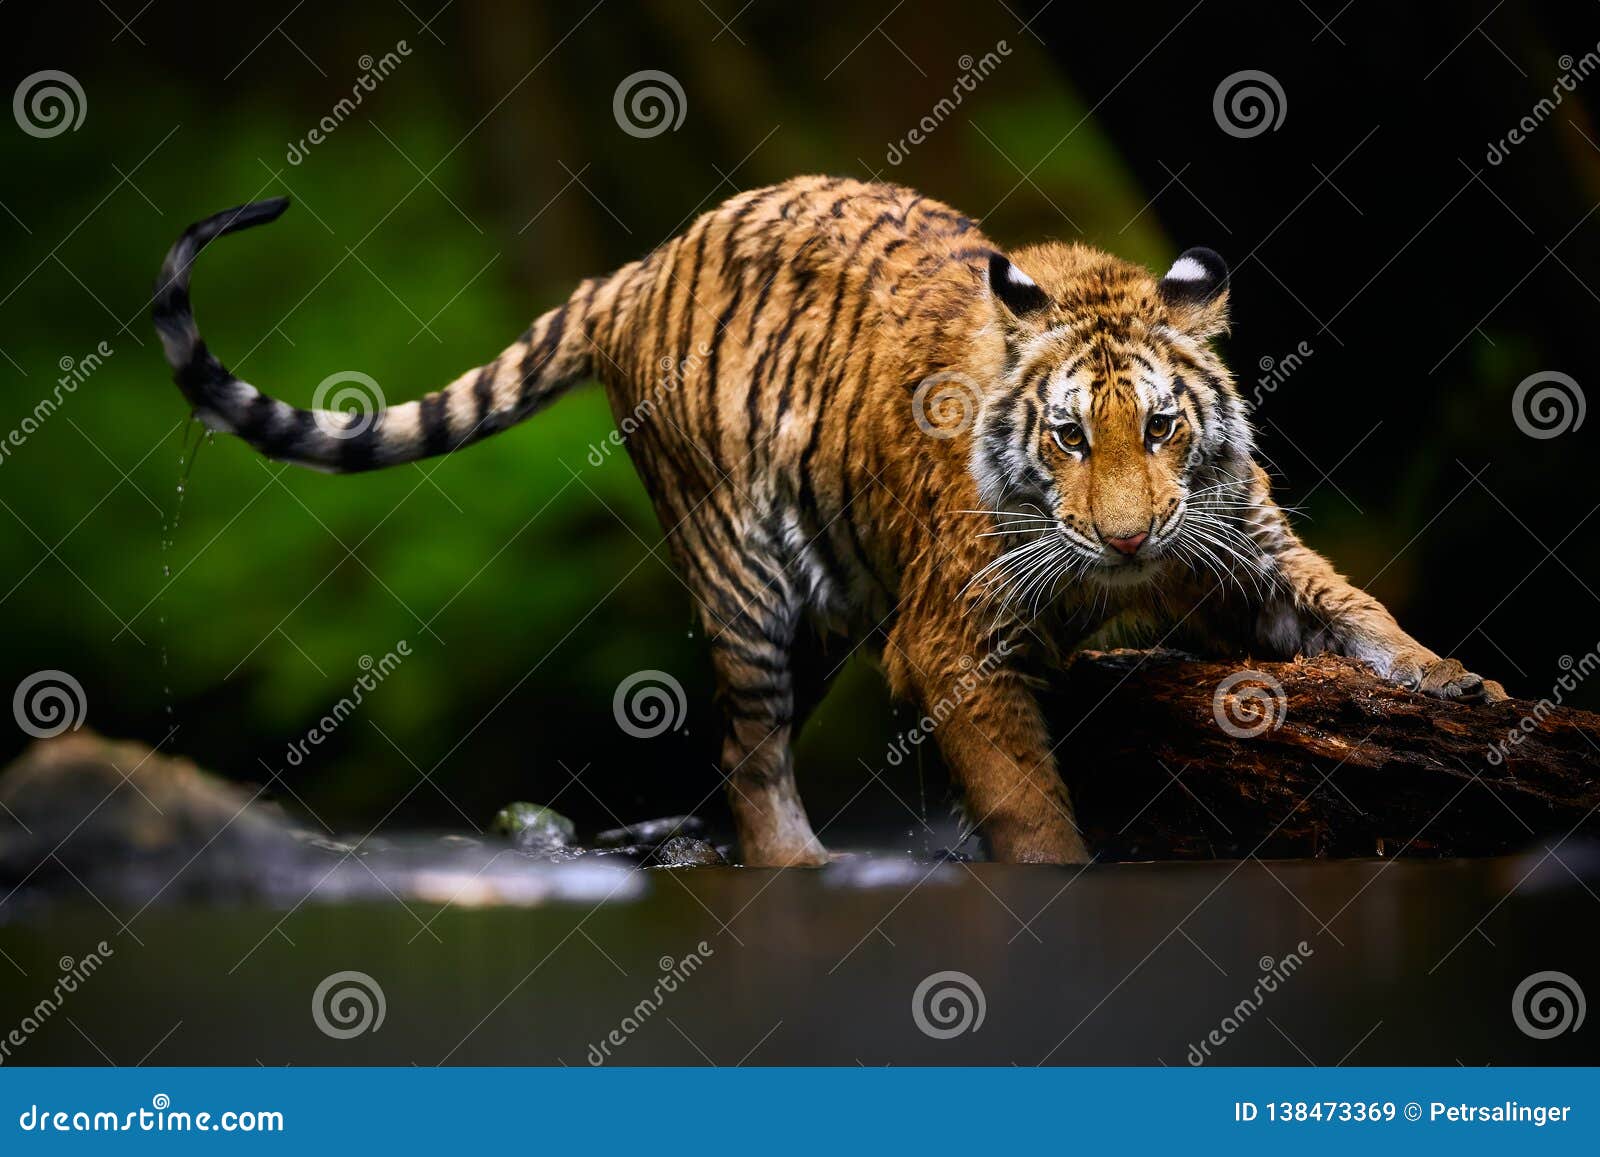 beautiful young siberian tiger - panthera tigris altaica is playing in the river with big wood. action wildlife scene.